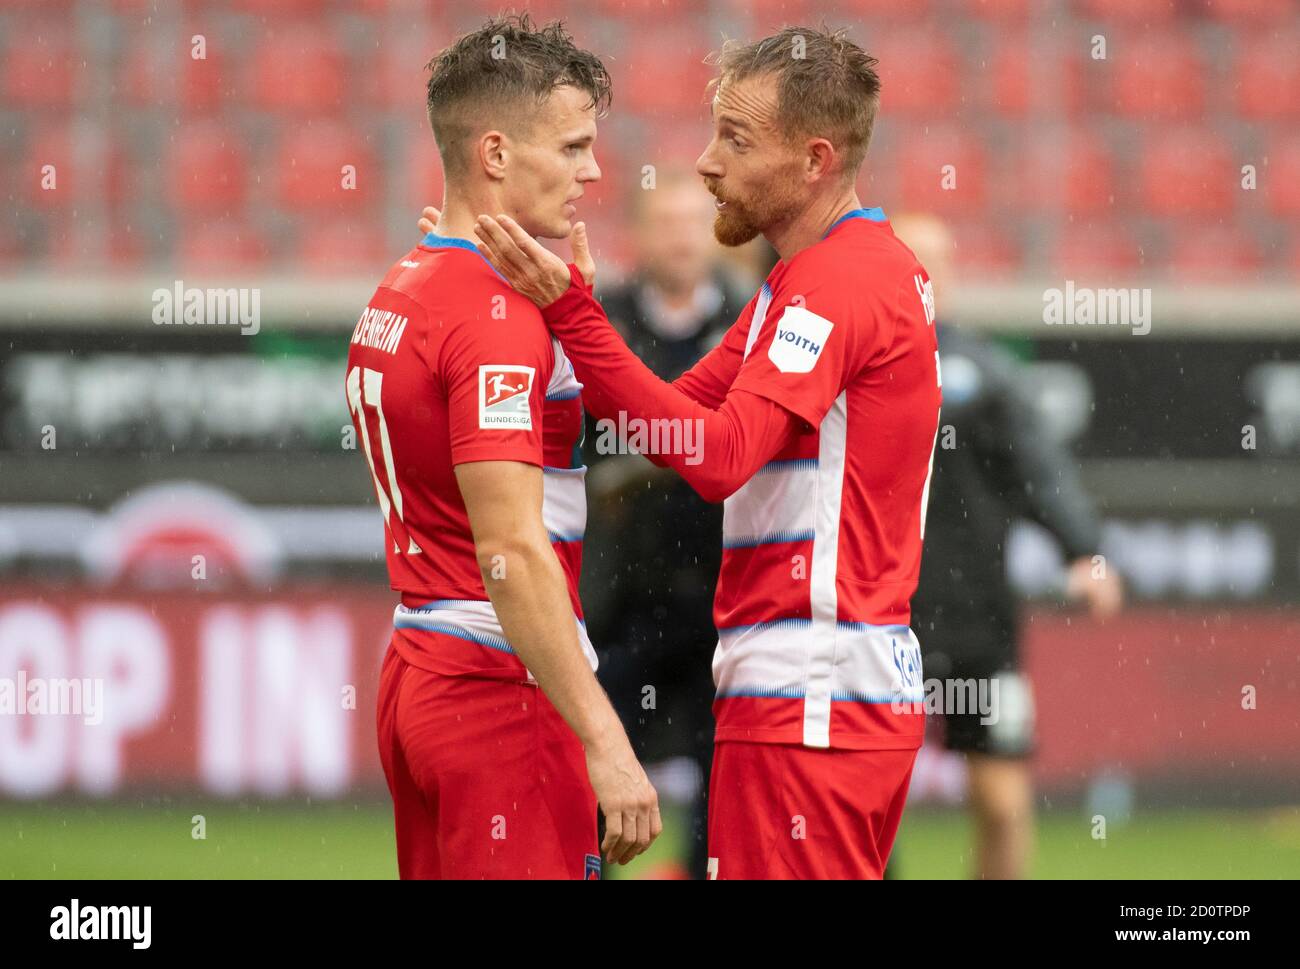 03 October 2020, Baden-Wuerttemberg, Heidenheim: Football: 2nd Bundesliga, 1st FC Heidenheim - SC Paderborn 07, 3rd matchday in the Voith Arena. Heidenheim Marc Schnatterer (r) and Florian Pick are talking after the match. Photo: Stefan Puchner/dpa - IMPORTANT NOTE: In accordance with the regulations of the DFL Deutsche Fußball Liga and the DFB Deutscher Fußball-Bund, it is prohibited to exploit or have exploited in the stadium and/or from the game taken photographs in the form of sequence images and/or video-like photo series. Stock Photo